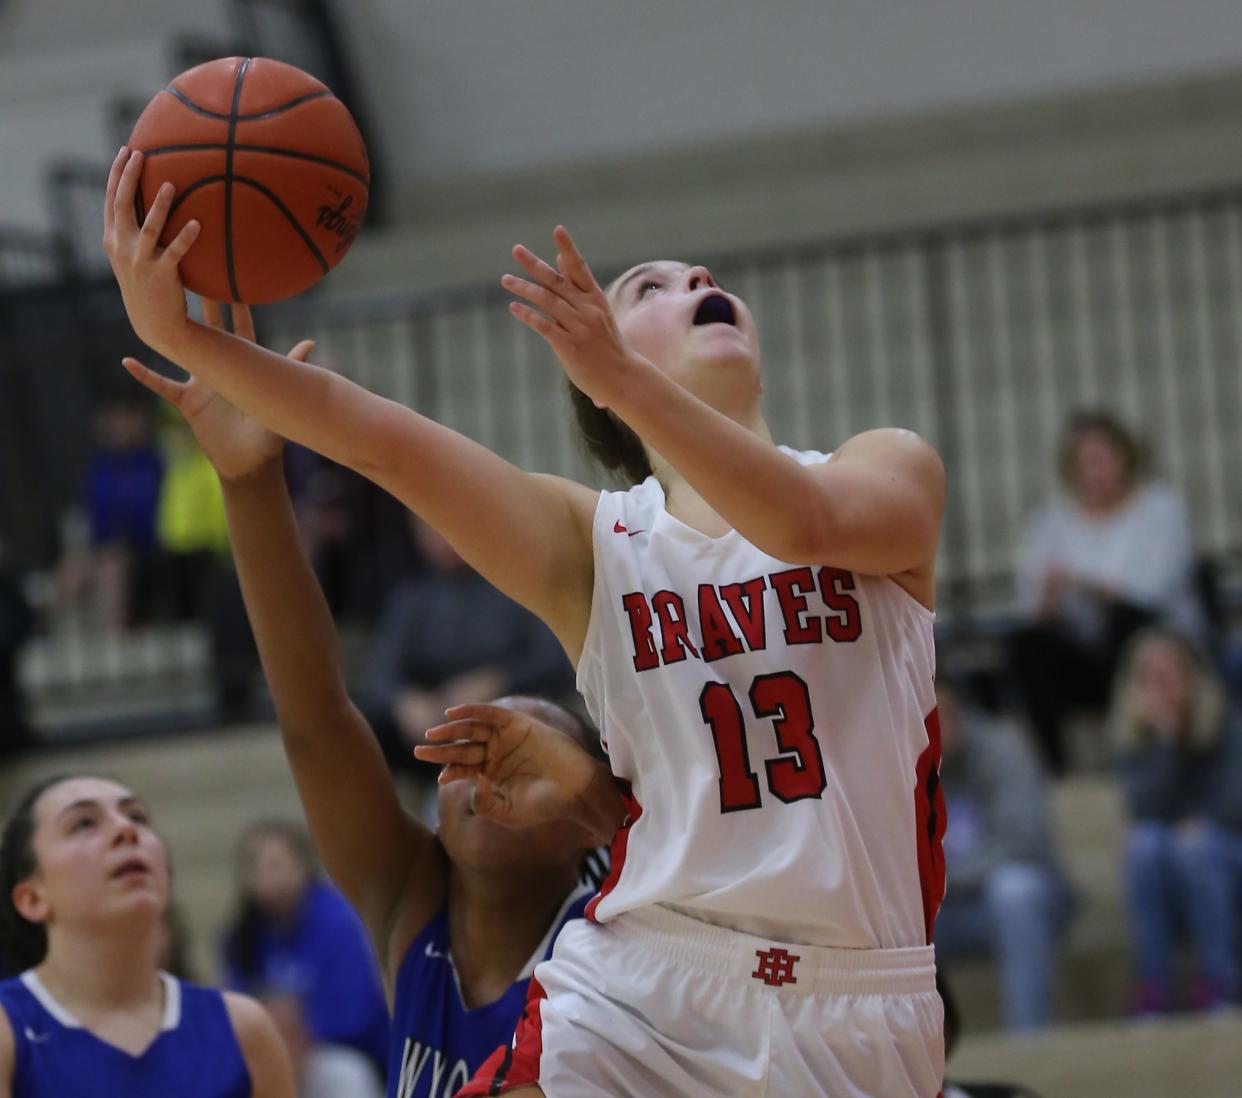 Maddie Antenucci was a four-year starter at Indian Hill, scoring 1,572 career points.